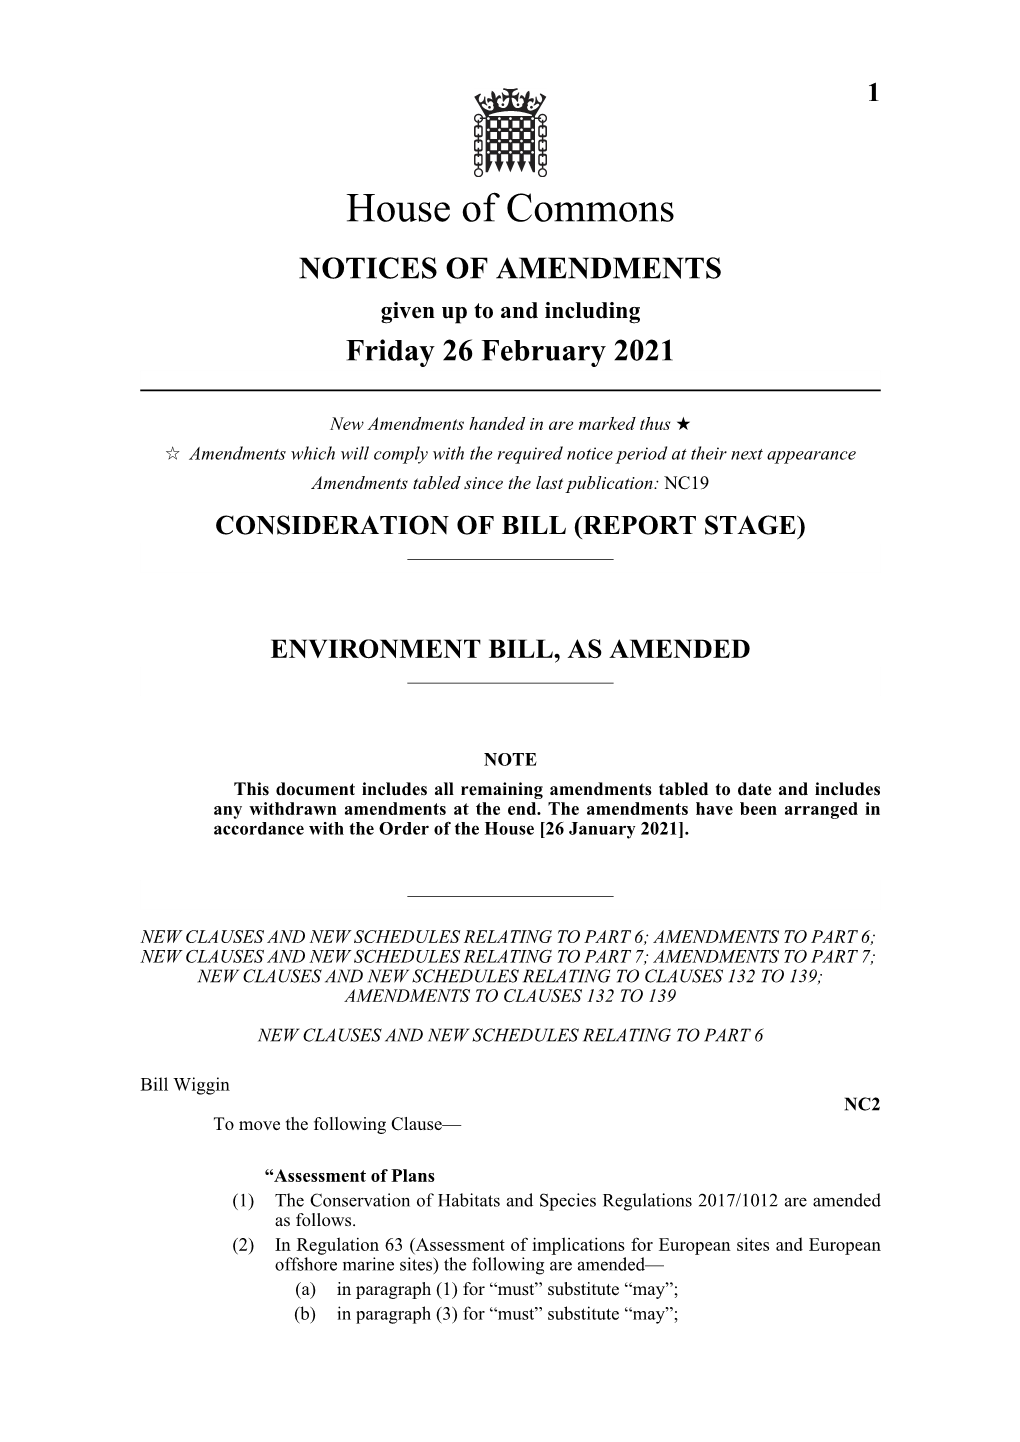 Environment Bill, As Amended